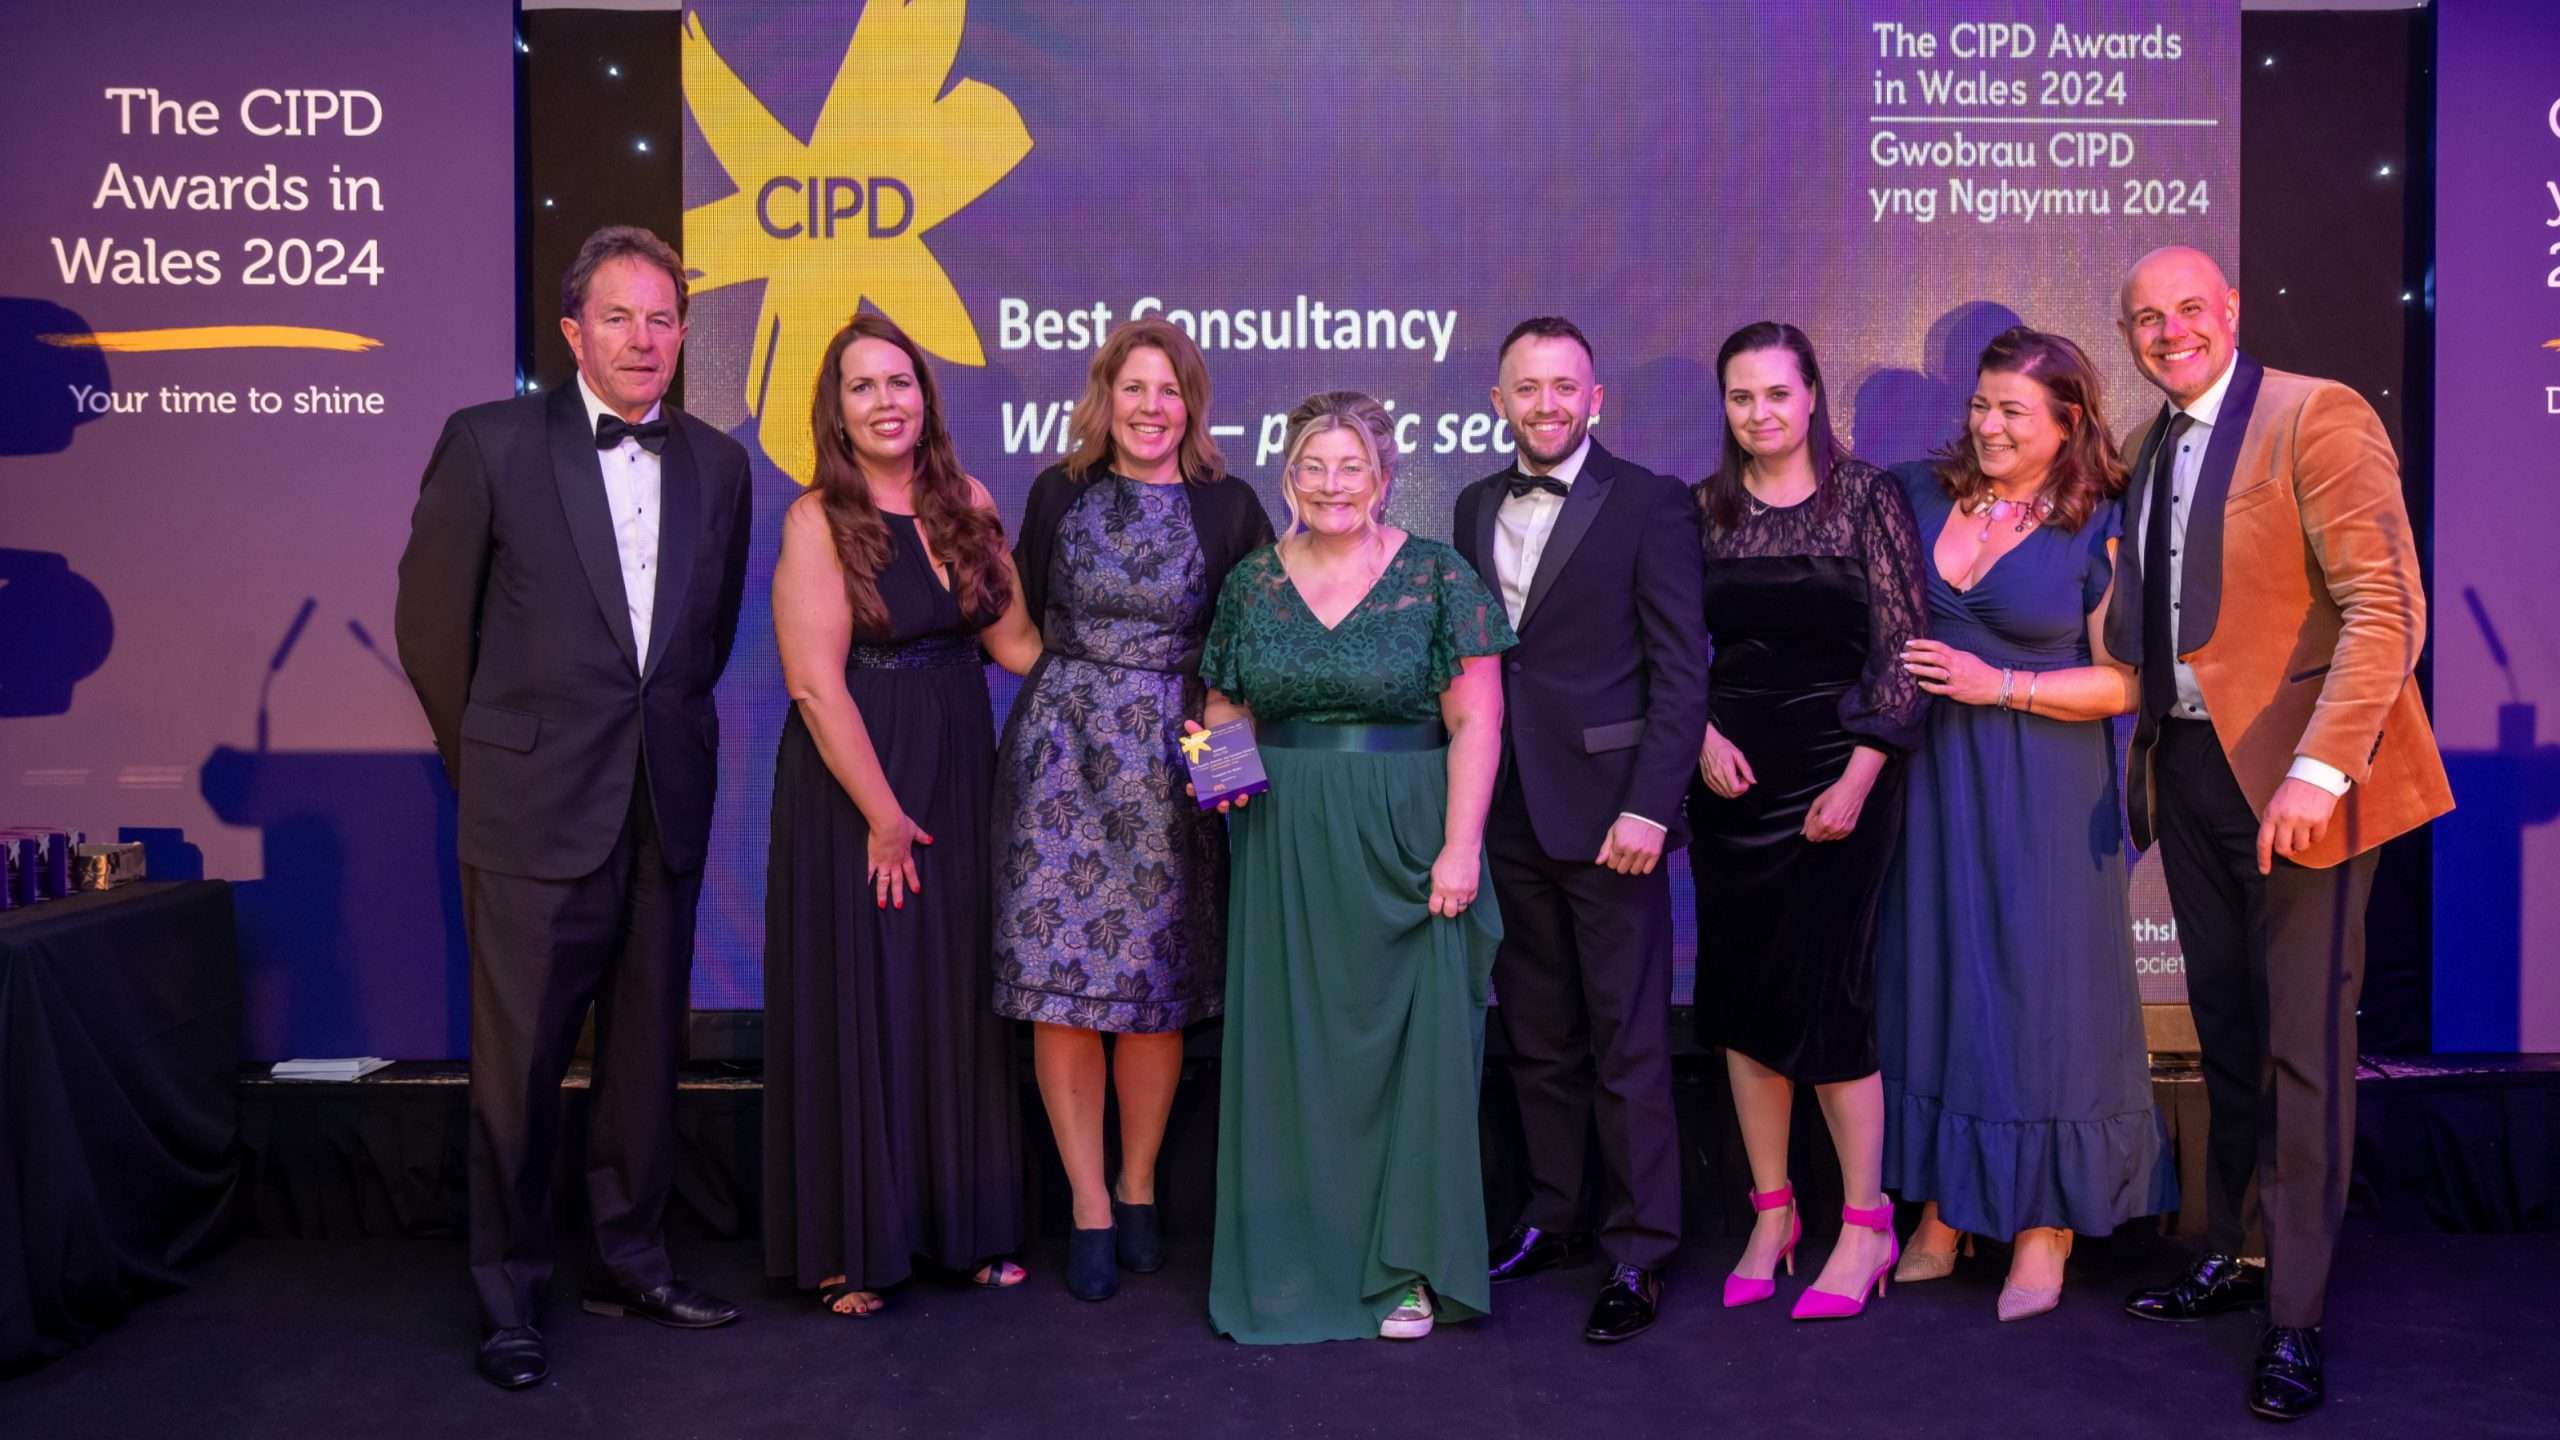 App support team for TFW win Best Equality Award at CIPD awards ceremony